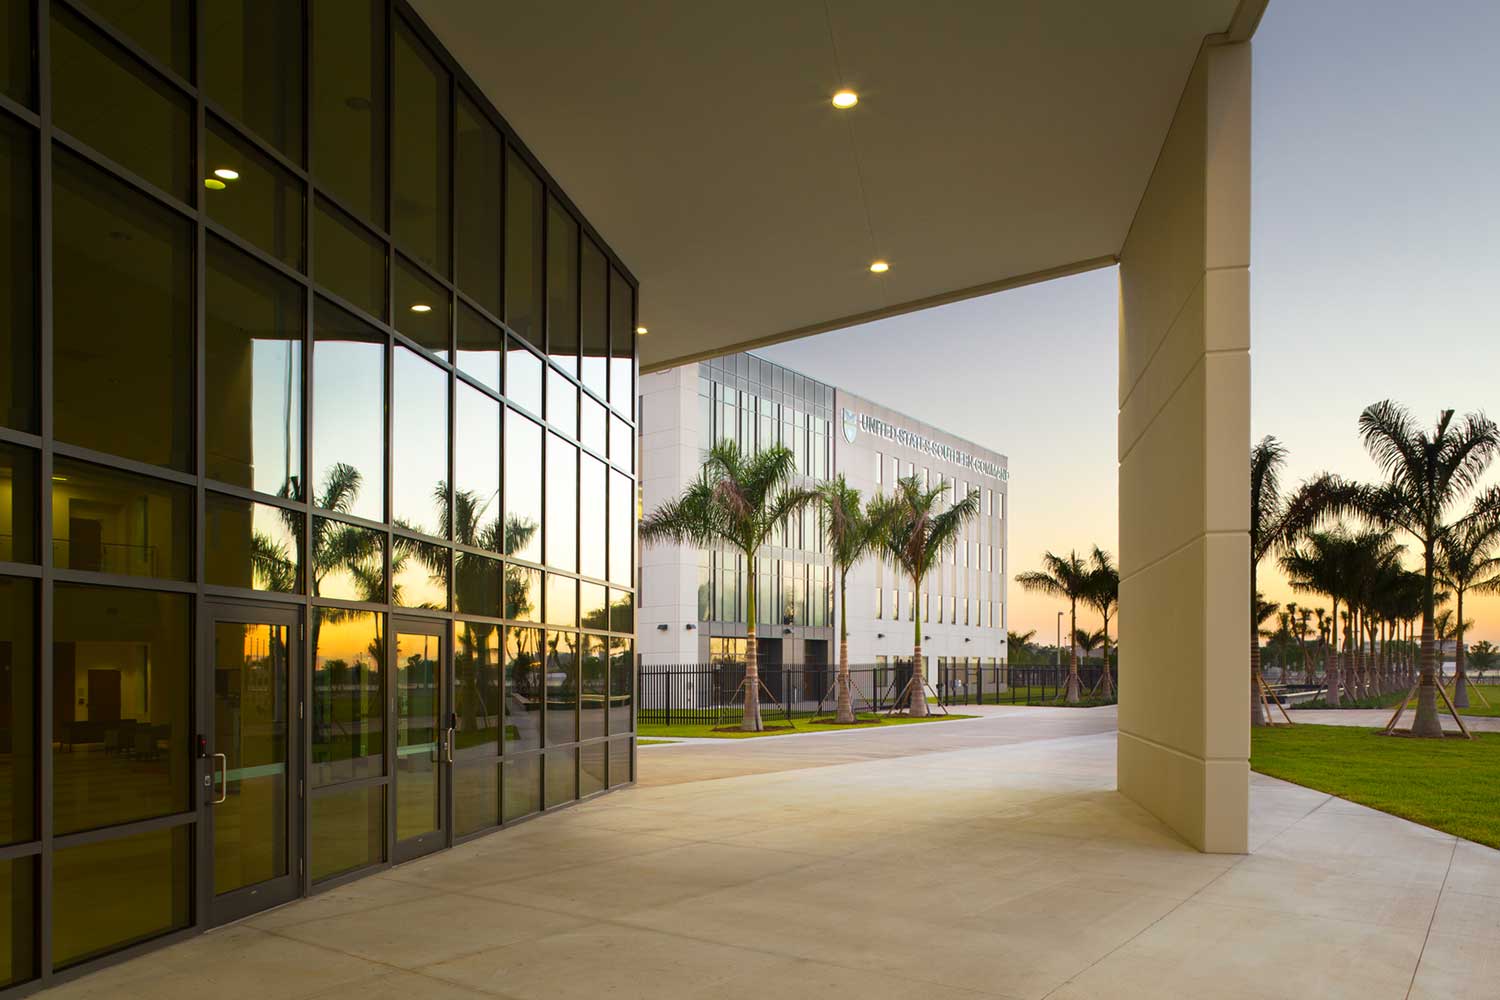 Ext of USA Command Center walkway with palm trees